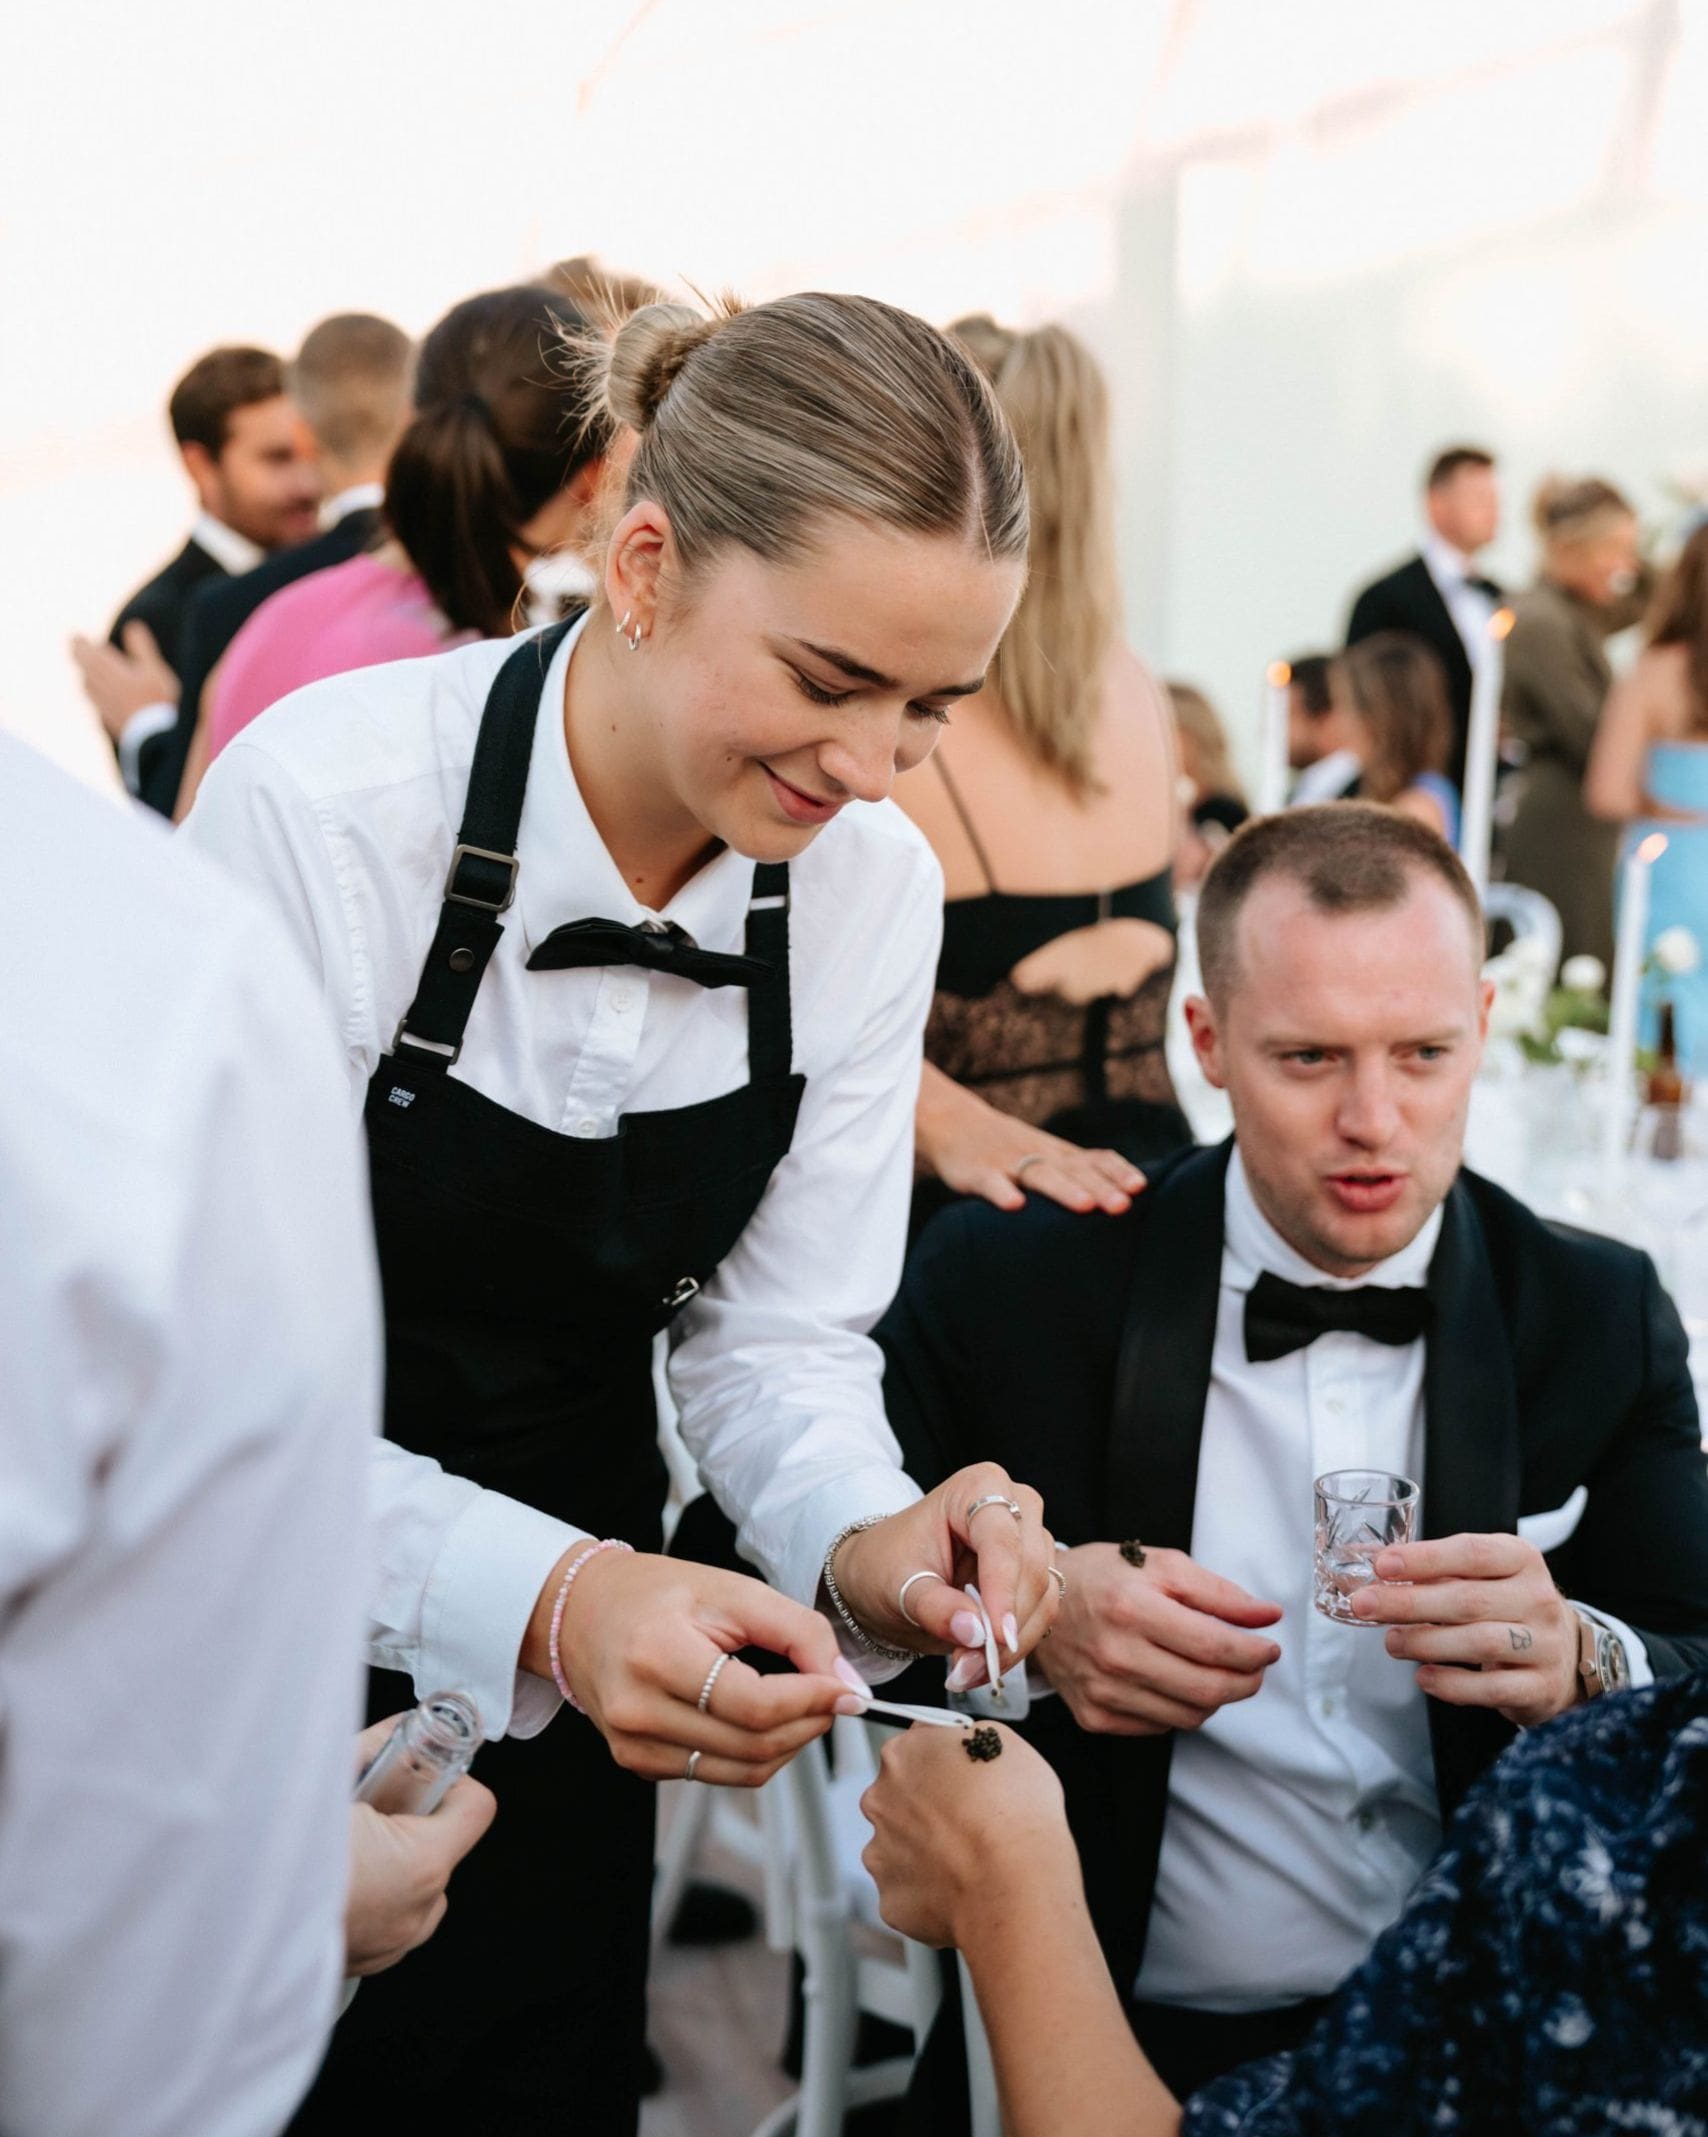 Waitress carefully presenting a caviar canapé at a corporate event, showcasing delicate finger food.